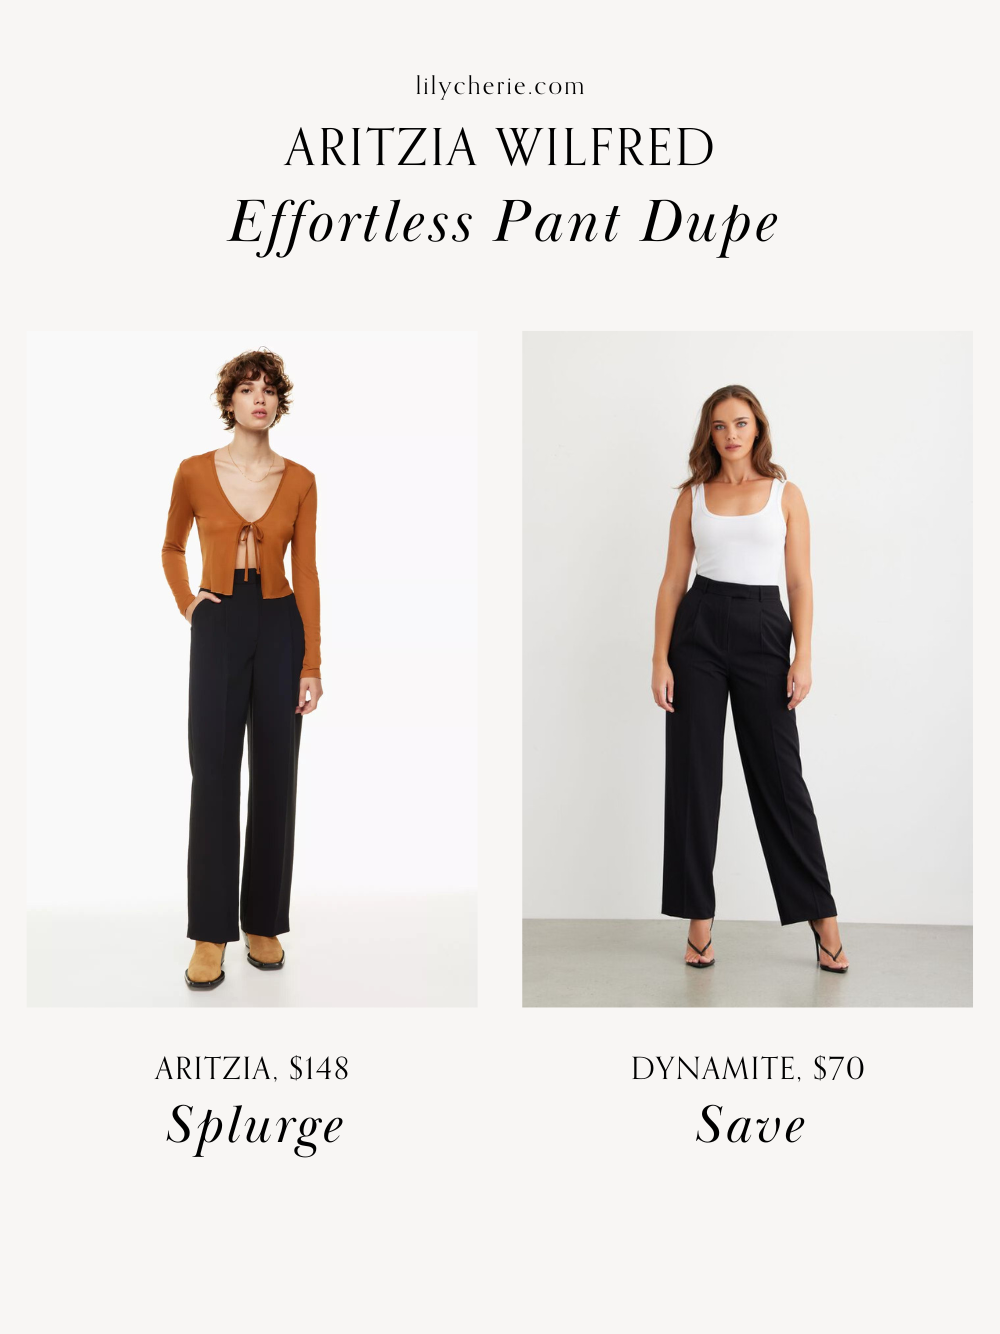 Recent Shopping Finds: Aritzia Dupes, New Mango, and More